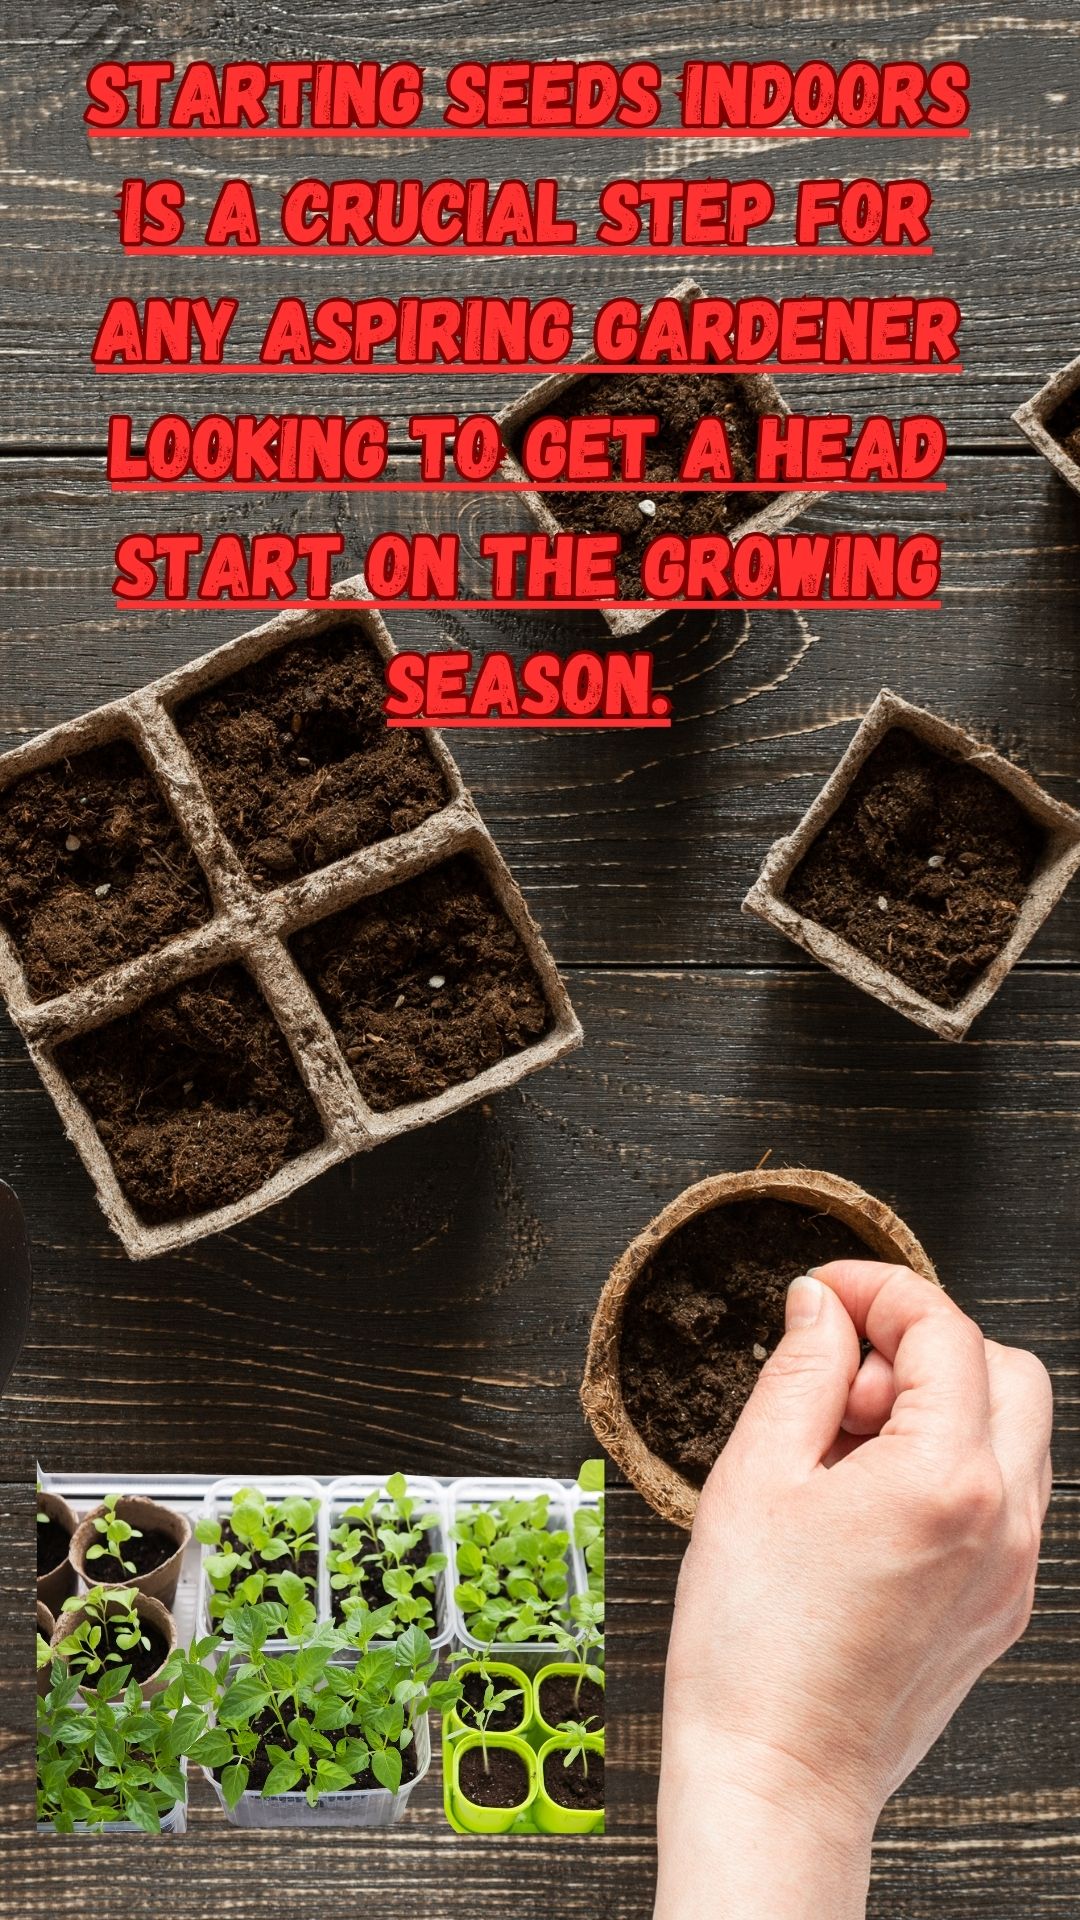 Starting seeds indoors is a crucial step for any aspiring gardener looking to get a head start on the growing season.